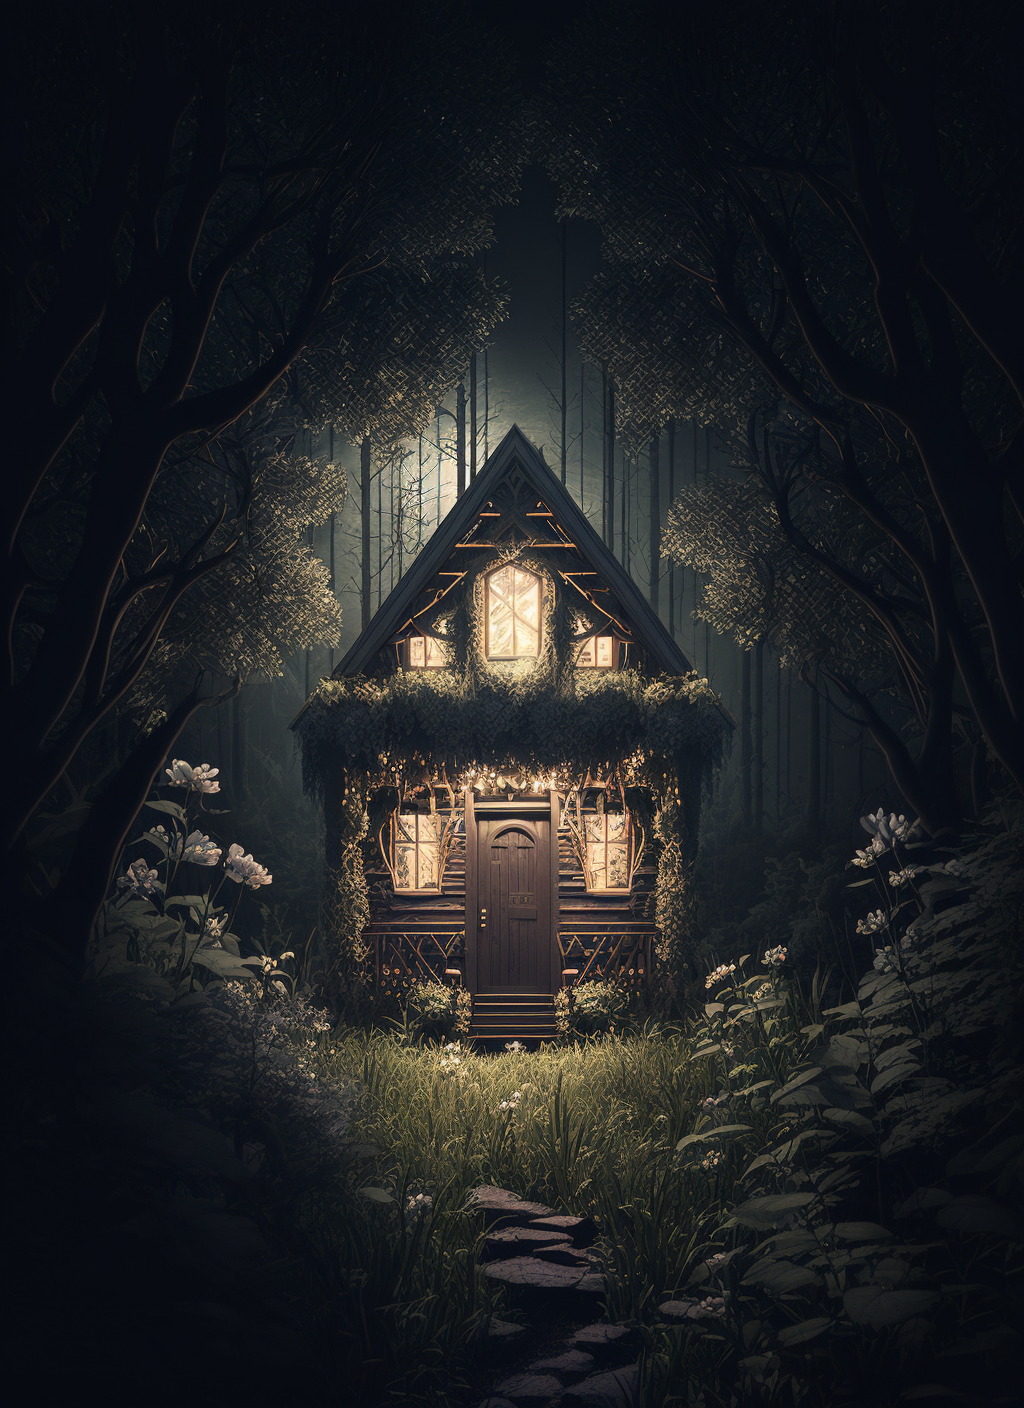 El_Topo_Loco_dark_lush_intricate_cabin_in_the_woods_overgrown_b_4bcd51ac-a462-4c8b-94af-65425ea603b7.png